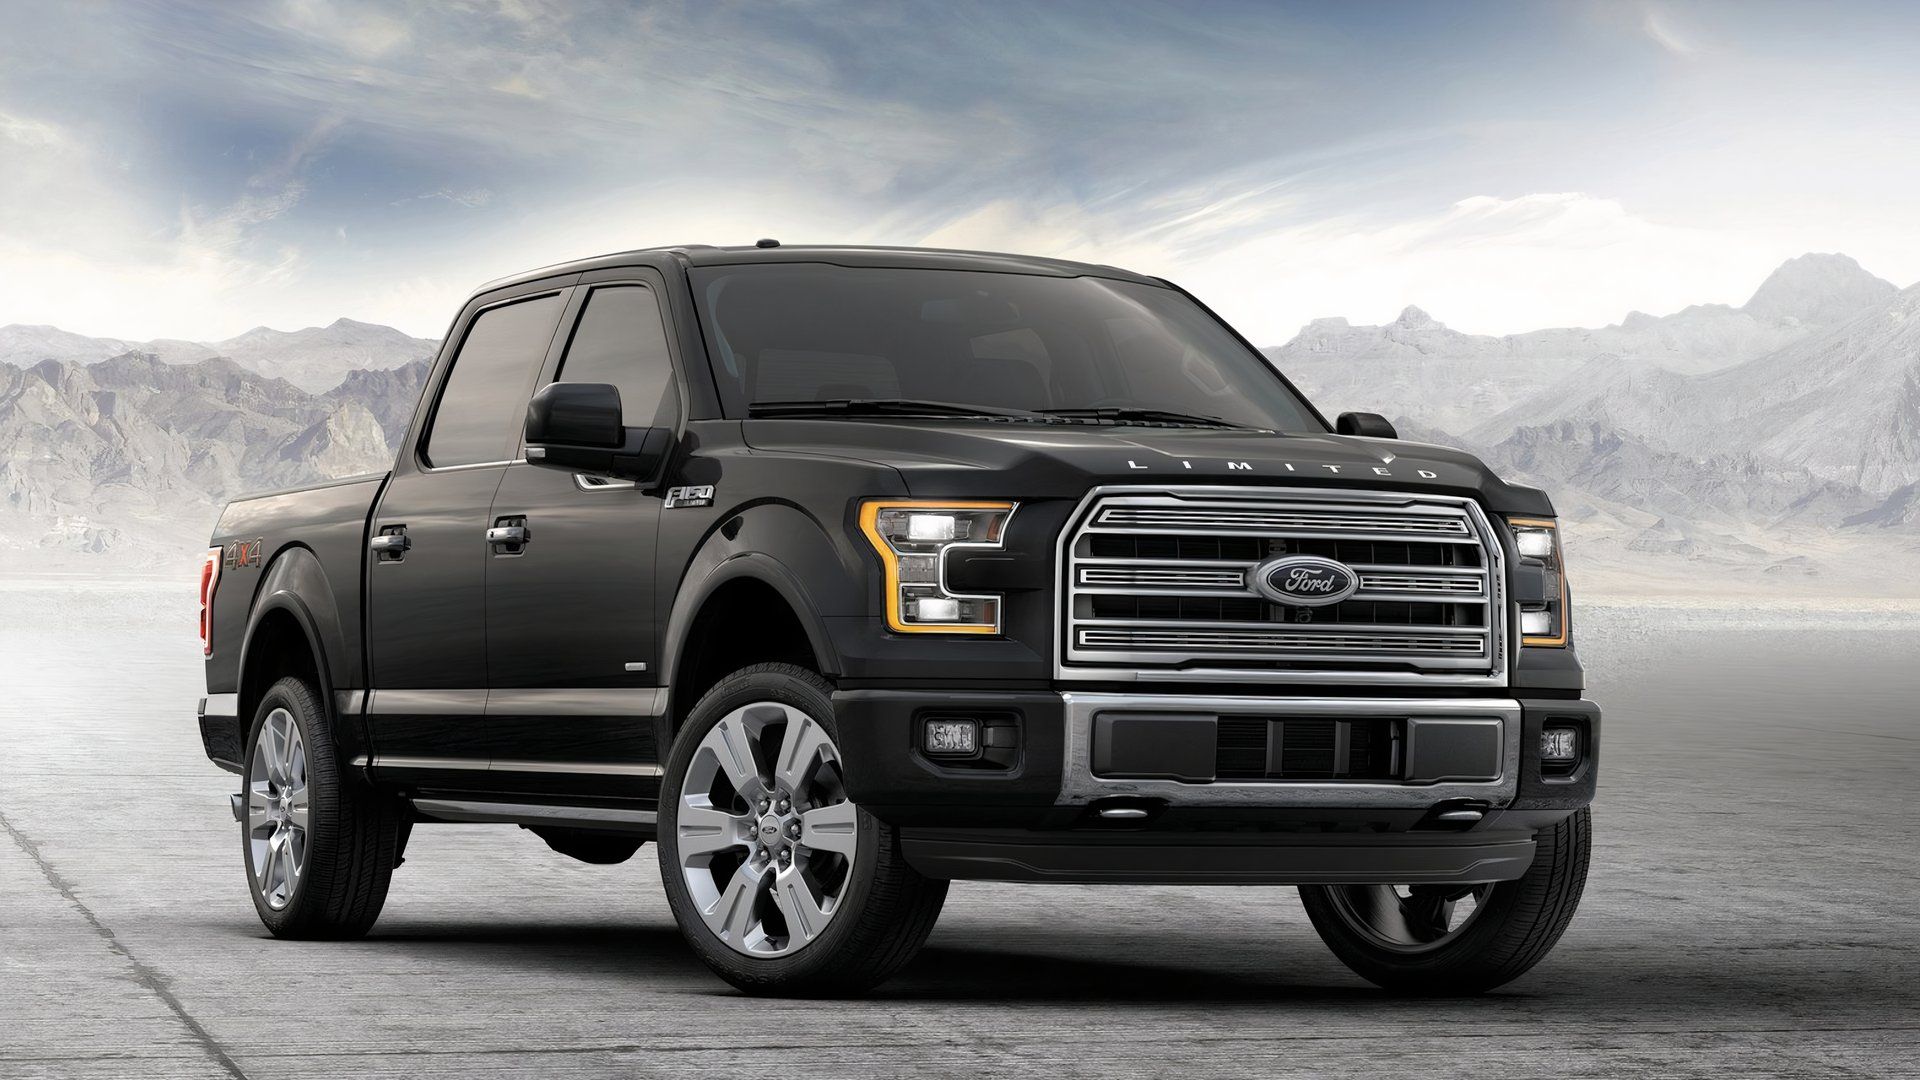 2017 Ford F-150 front